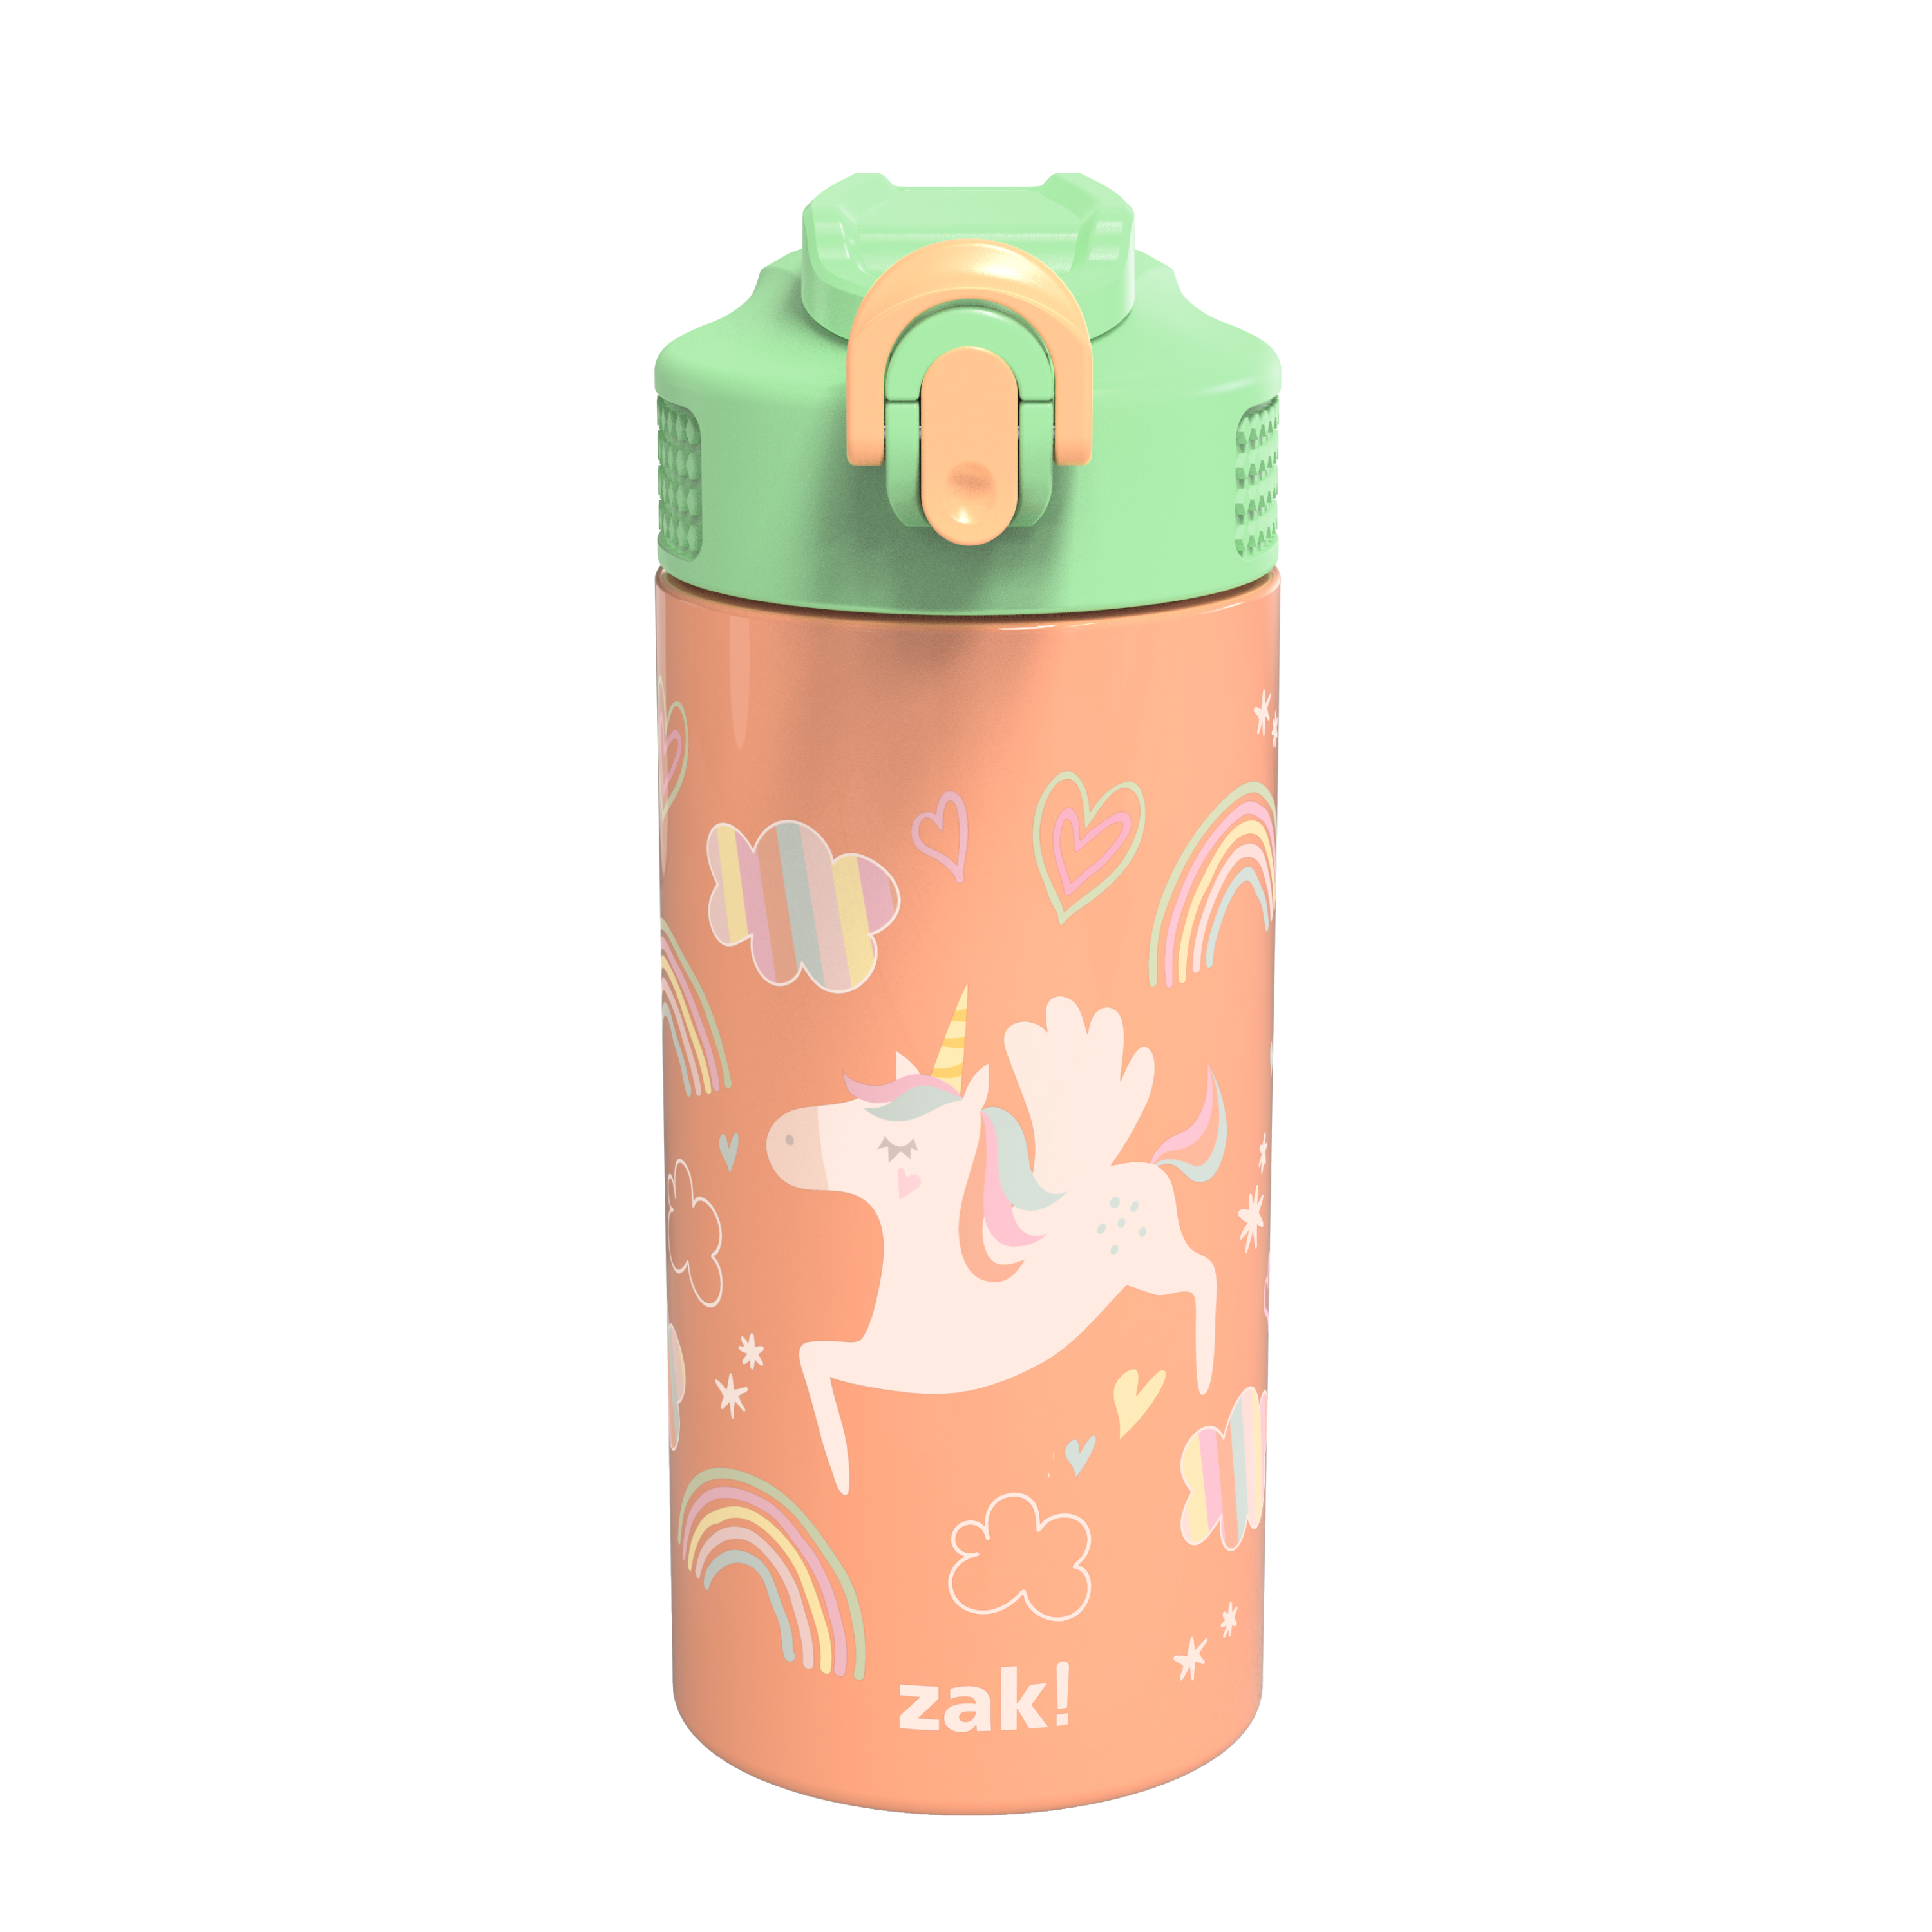 Unicorn 14 ounce Stainless Steel Vacuum Insulated Water Bottle, Multicolored slideshow image 1